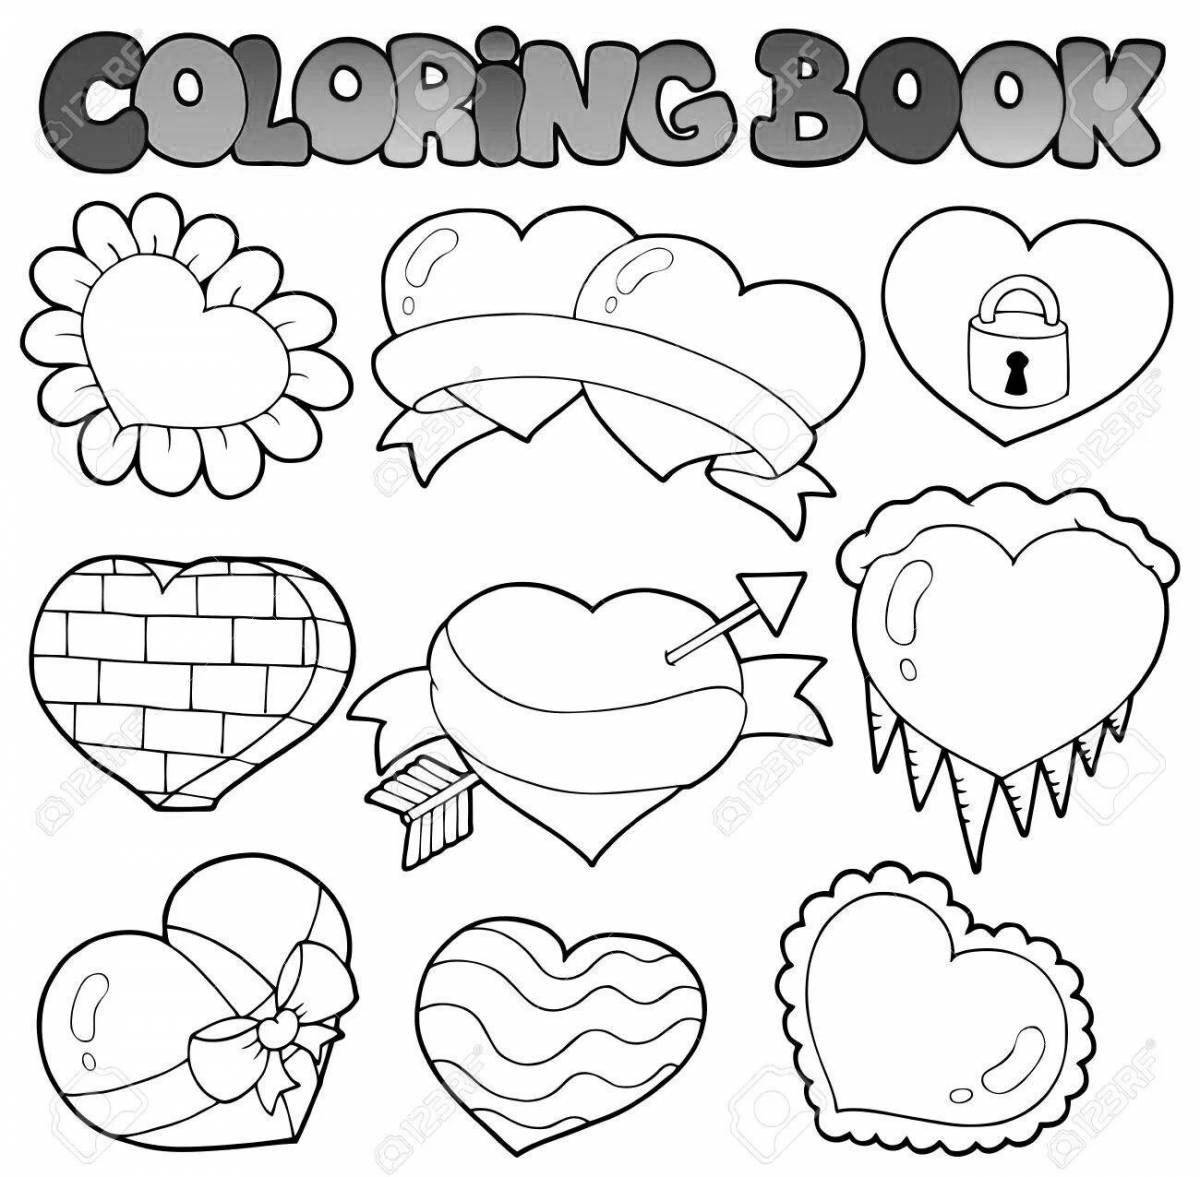 Coloring bright little hearts